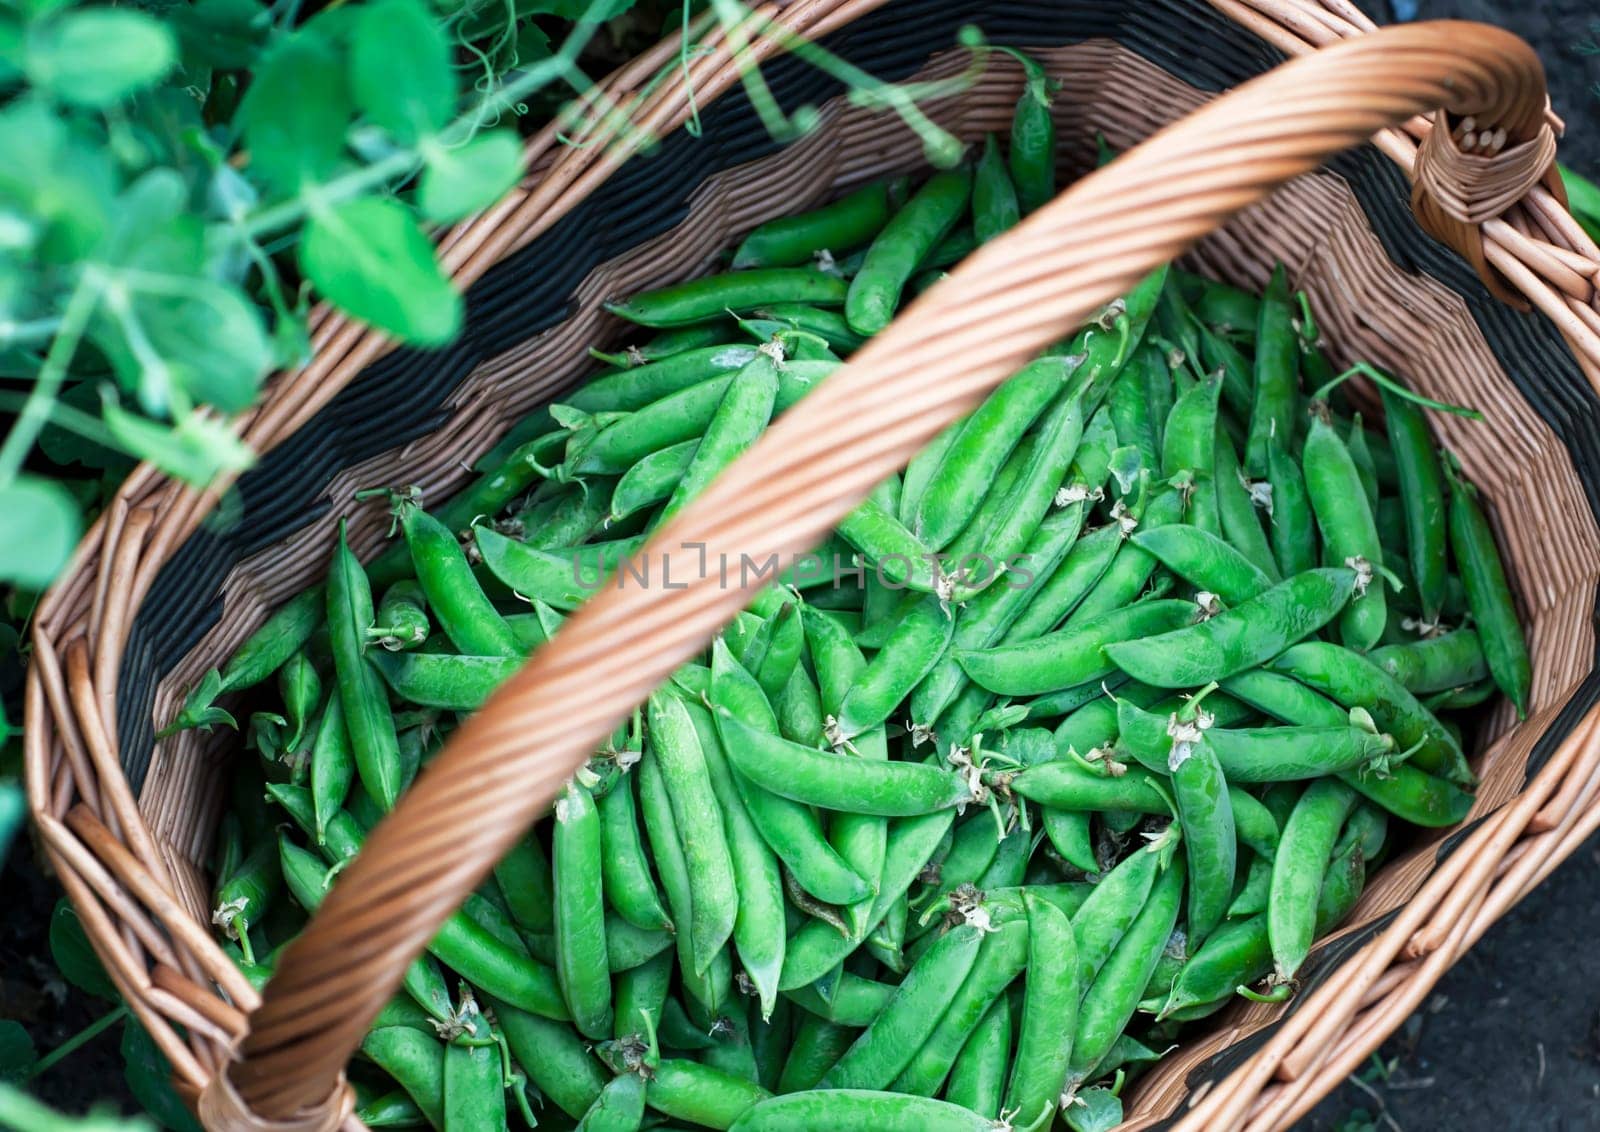 Raw pods of green sugar peas in baskets are harvested in the garden by aprilphoto